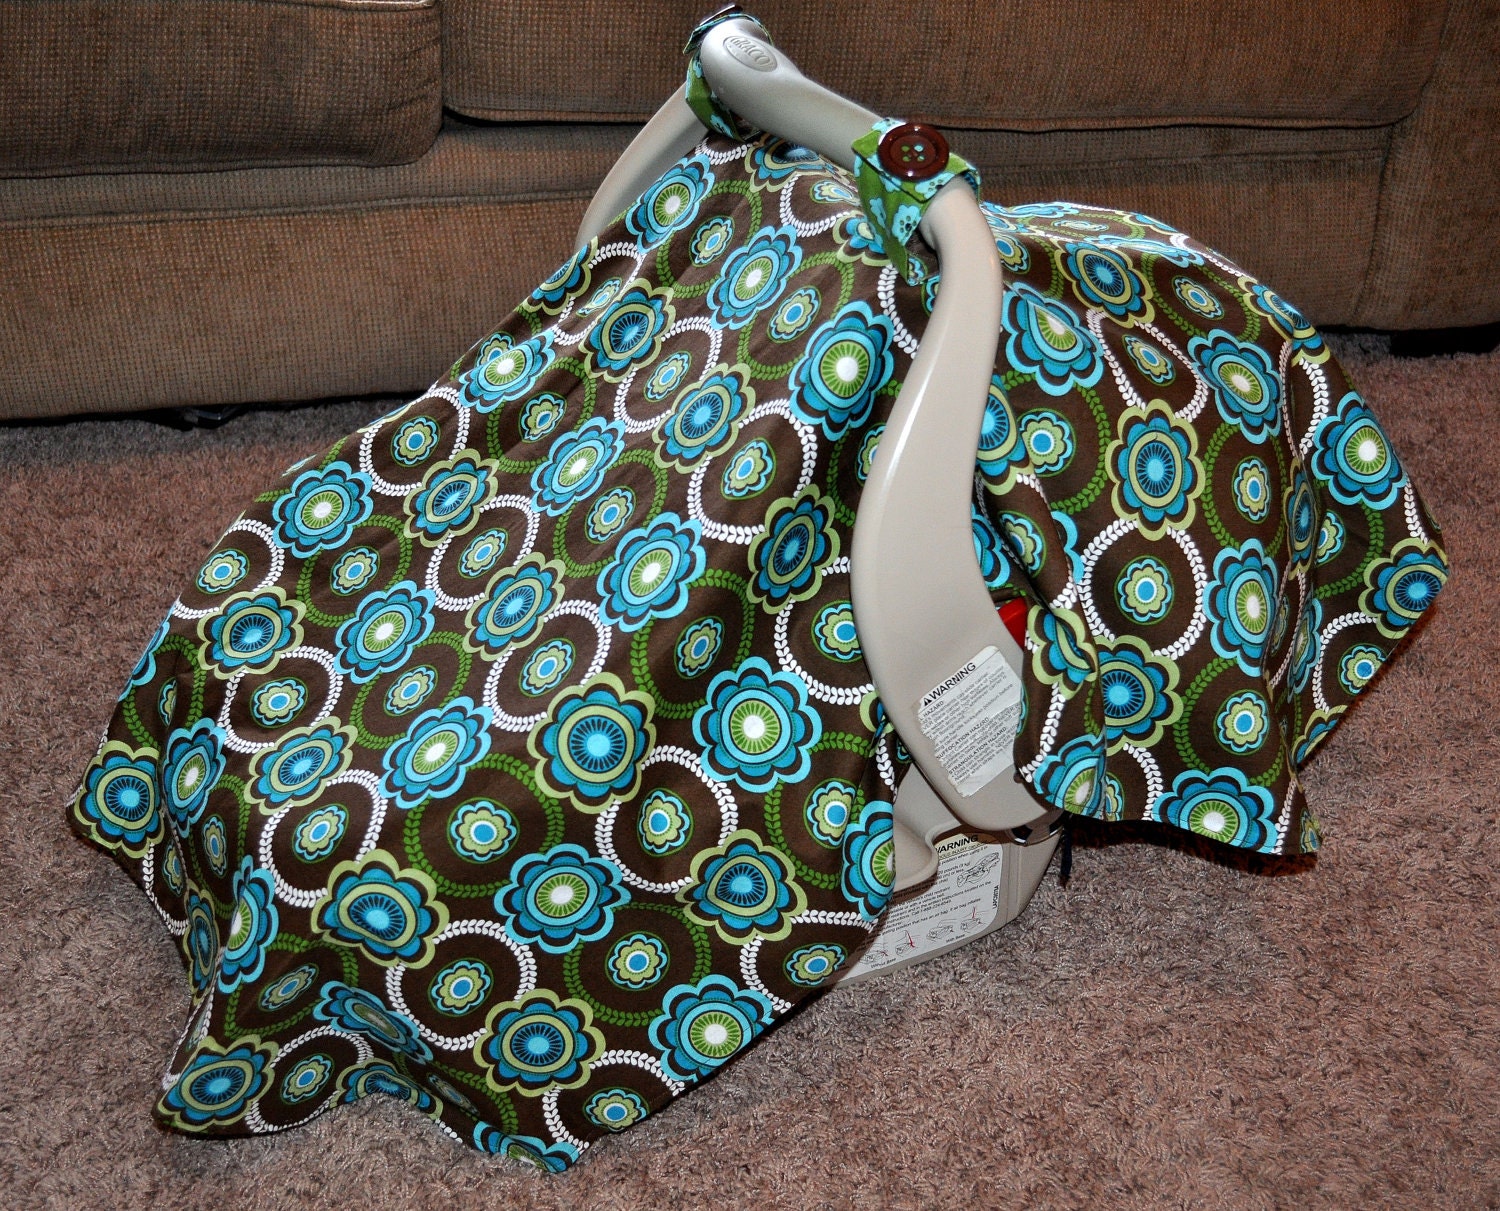 Retro Flowers in Blue, Brown & Green Reversible Infant Carseat Cover Tent Canopy - READY TO SHIP